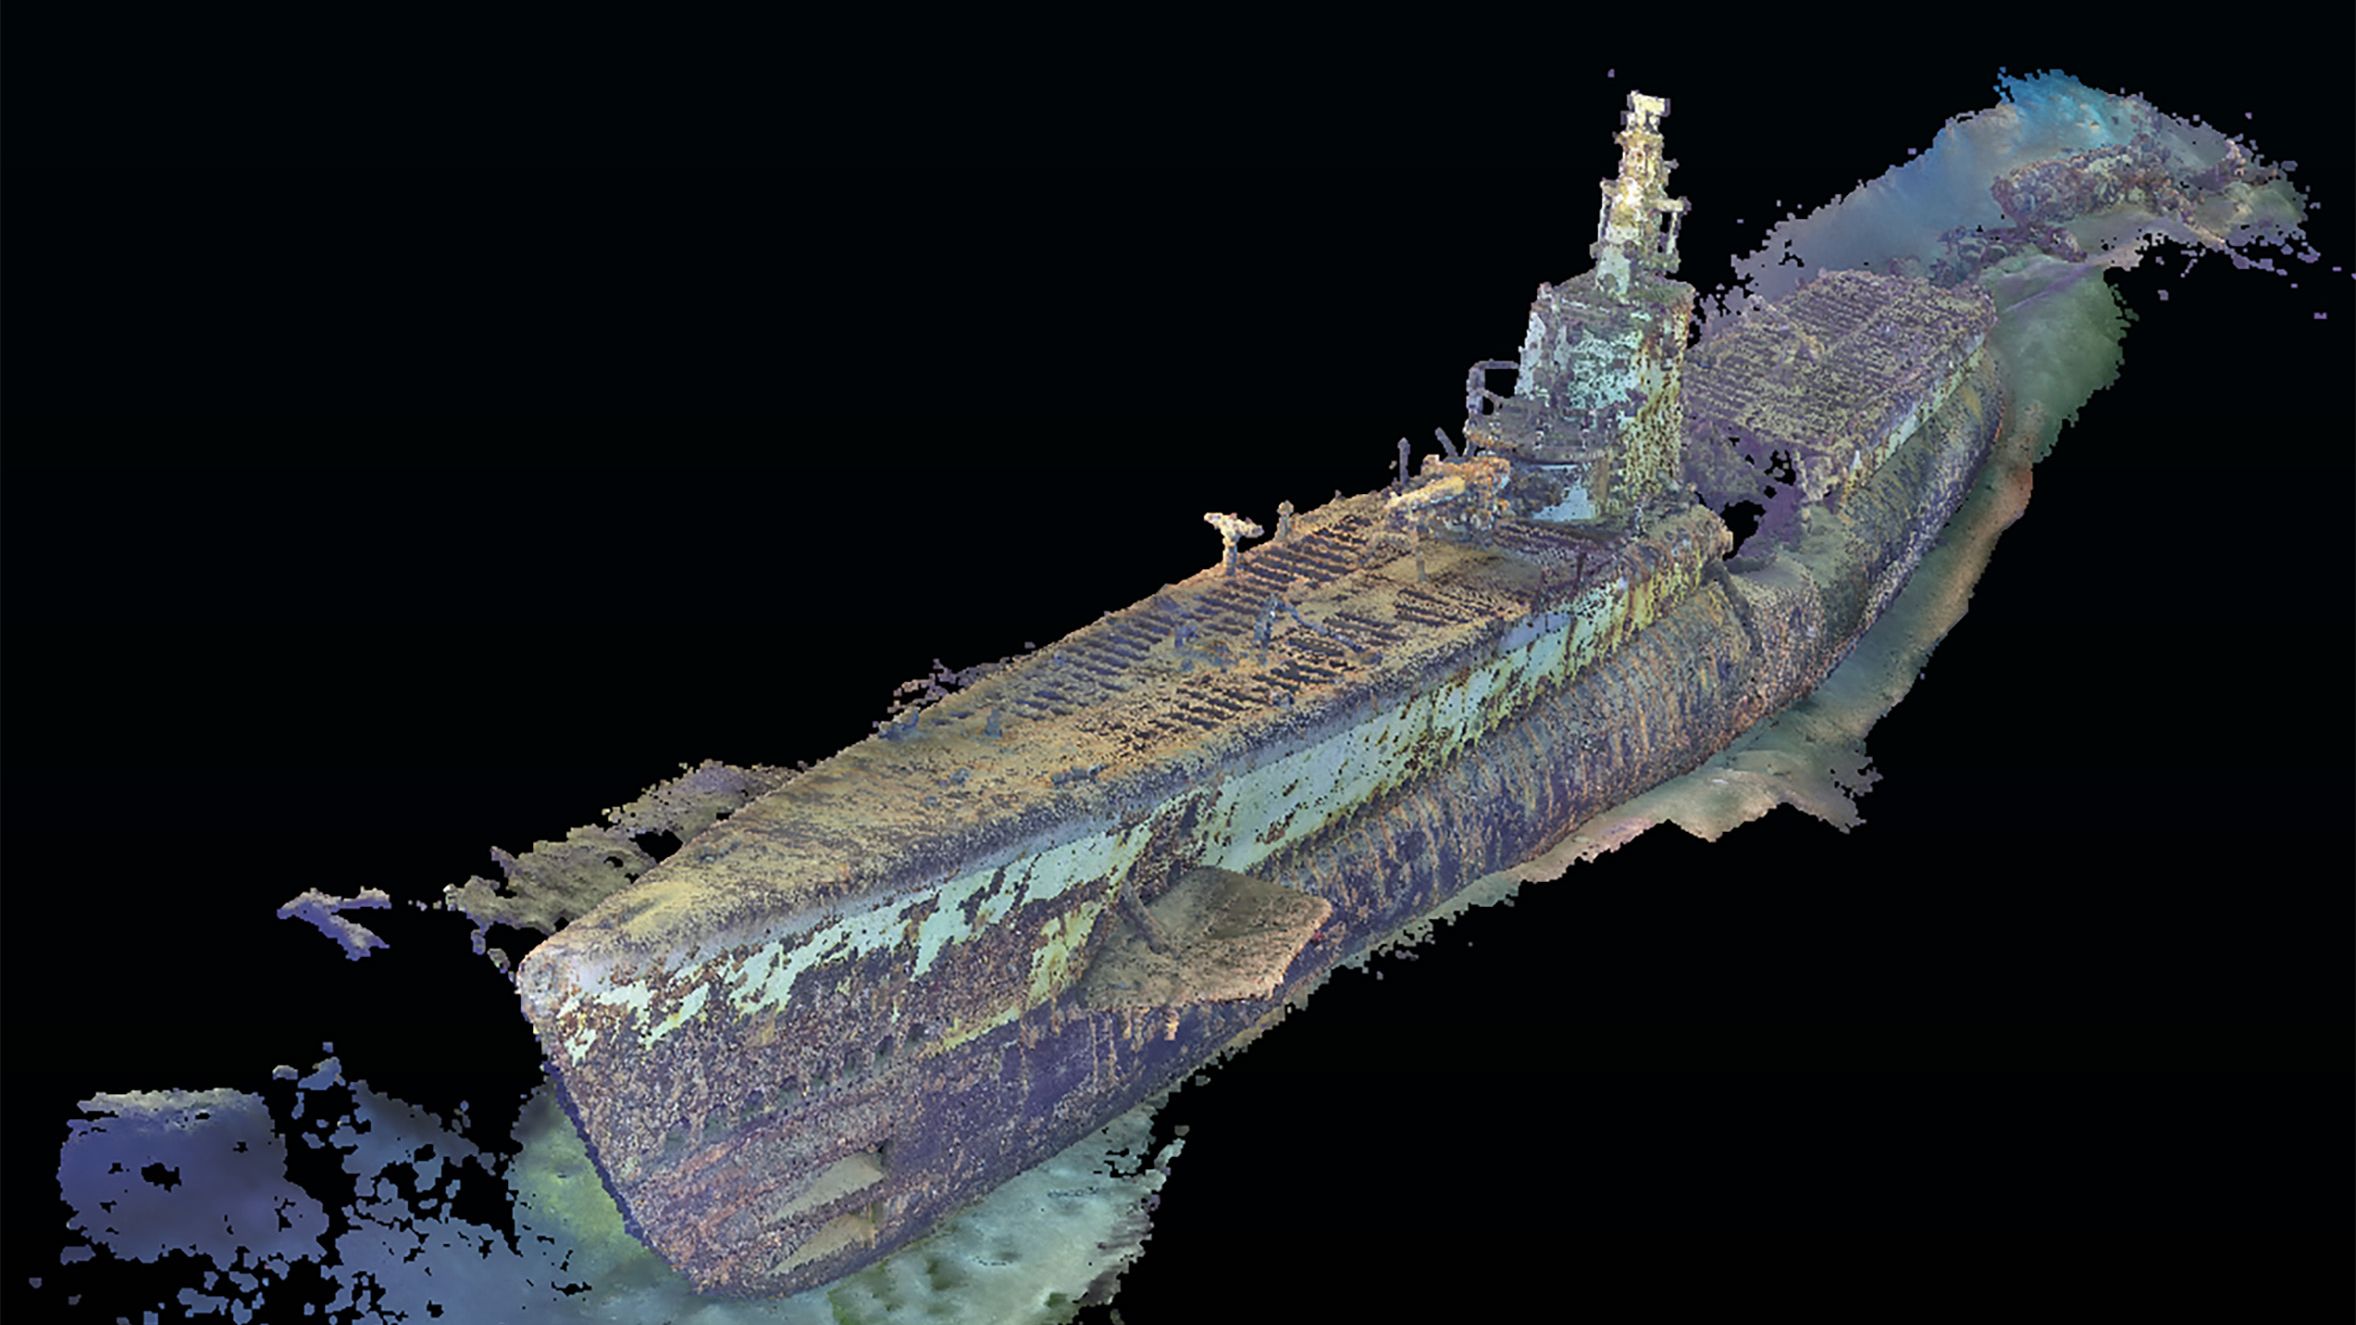 4D photogrammetry model of USS Harder (SS 257) wreck site by The Lost 52. The Lost 52 Project scanned the entire boat and stitched all the images together in a multi-dimensional model used to study and explore the site.